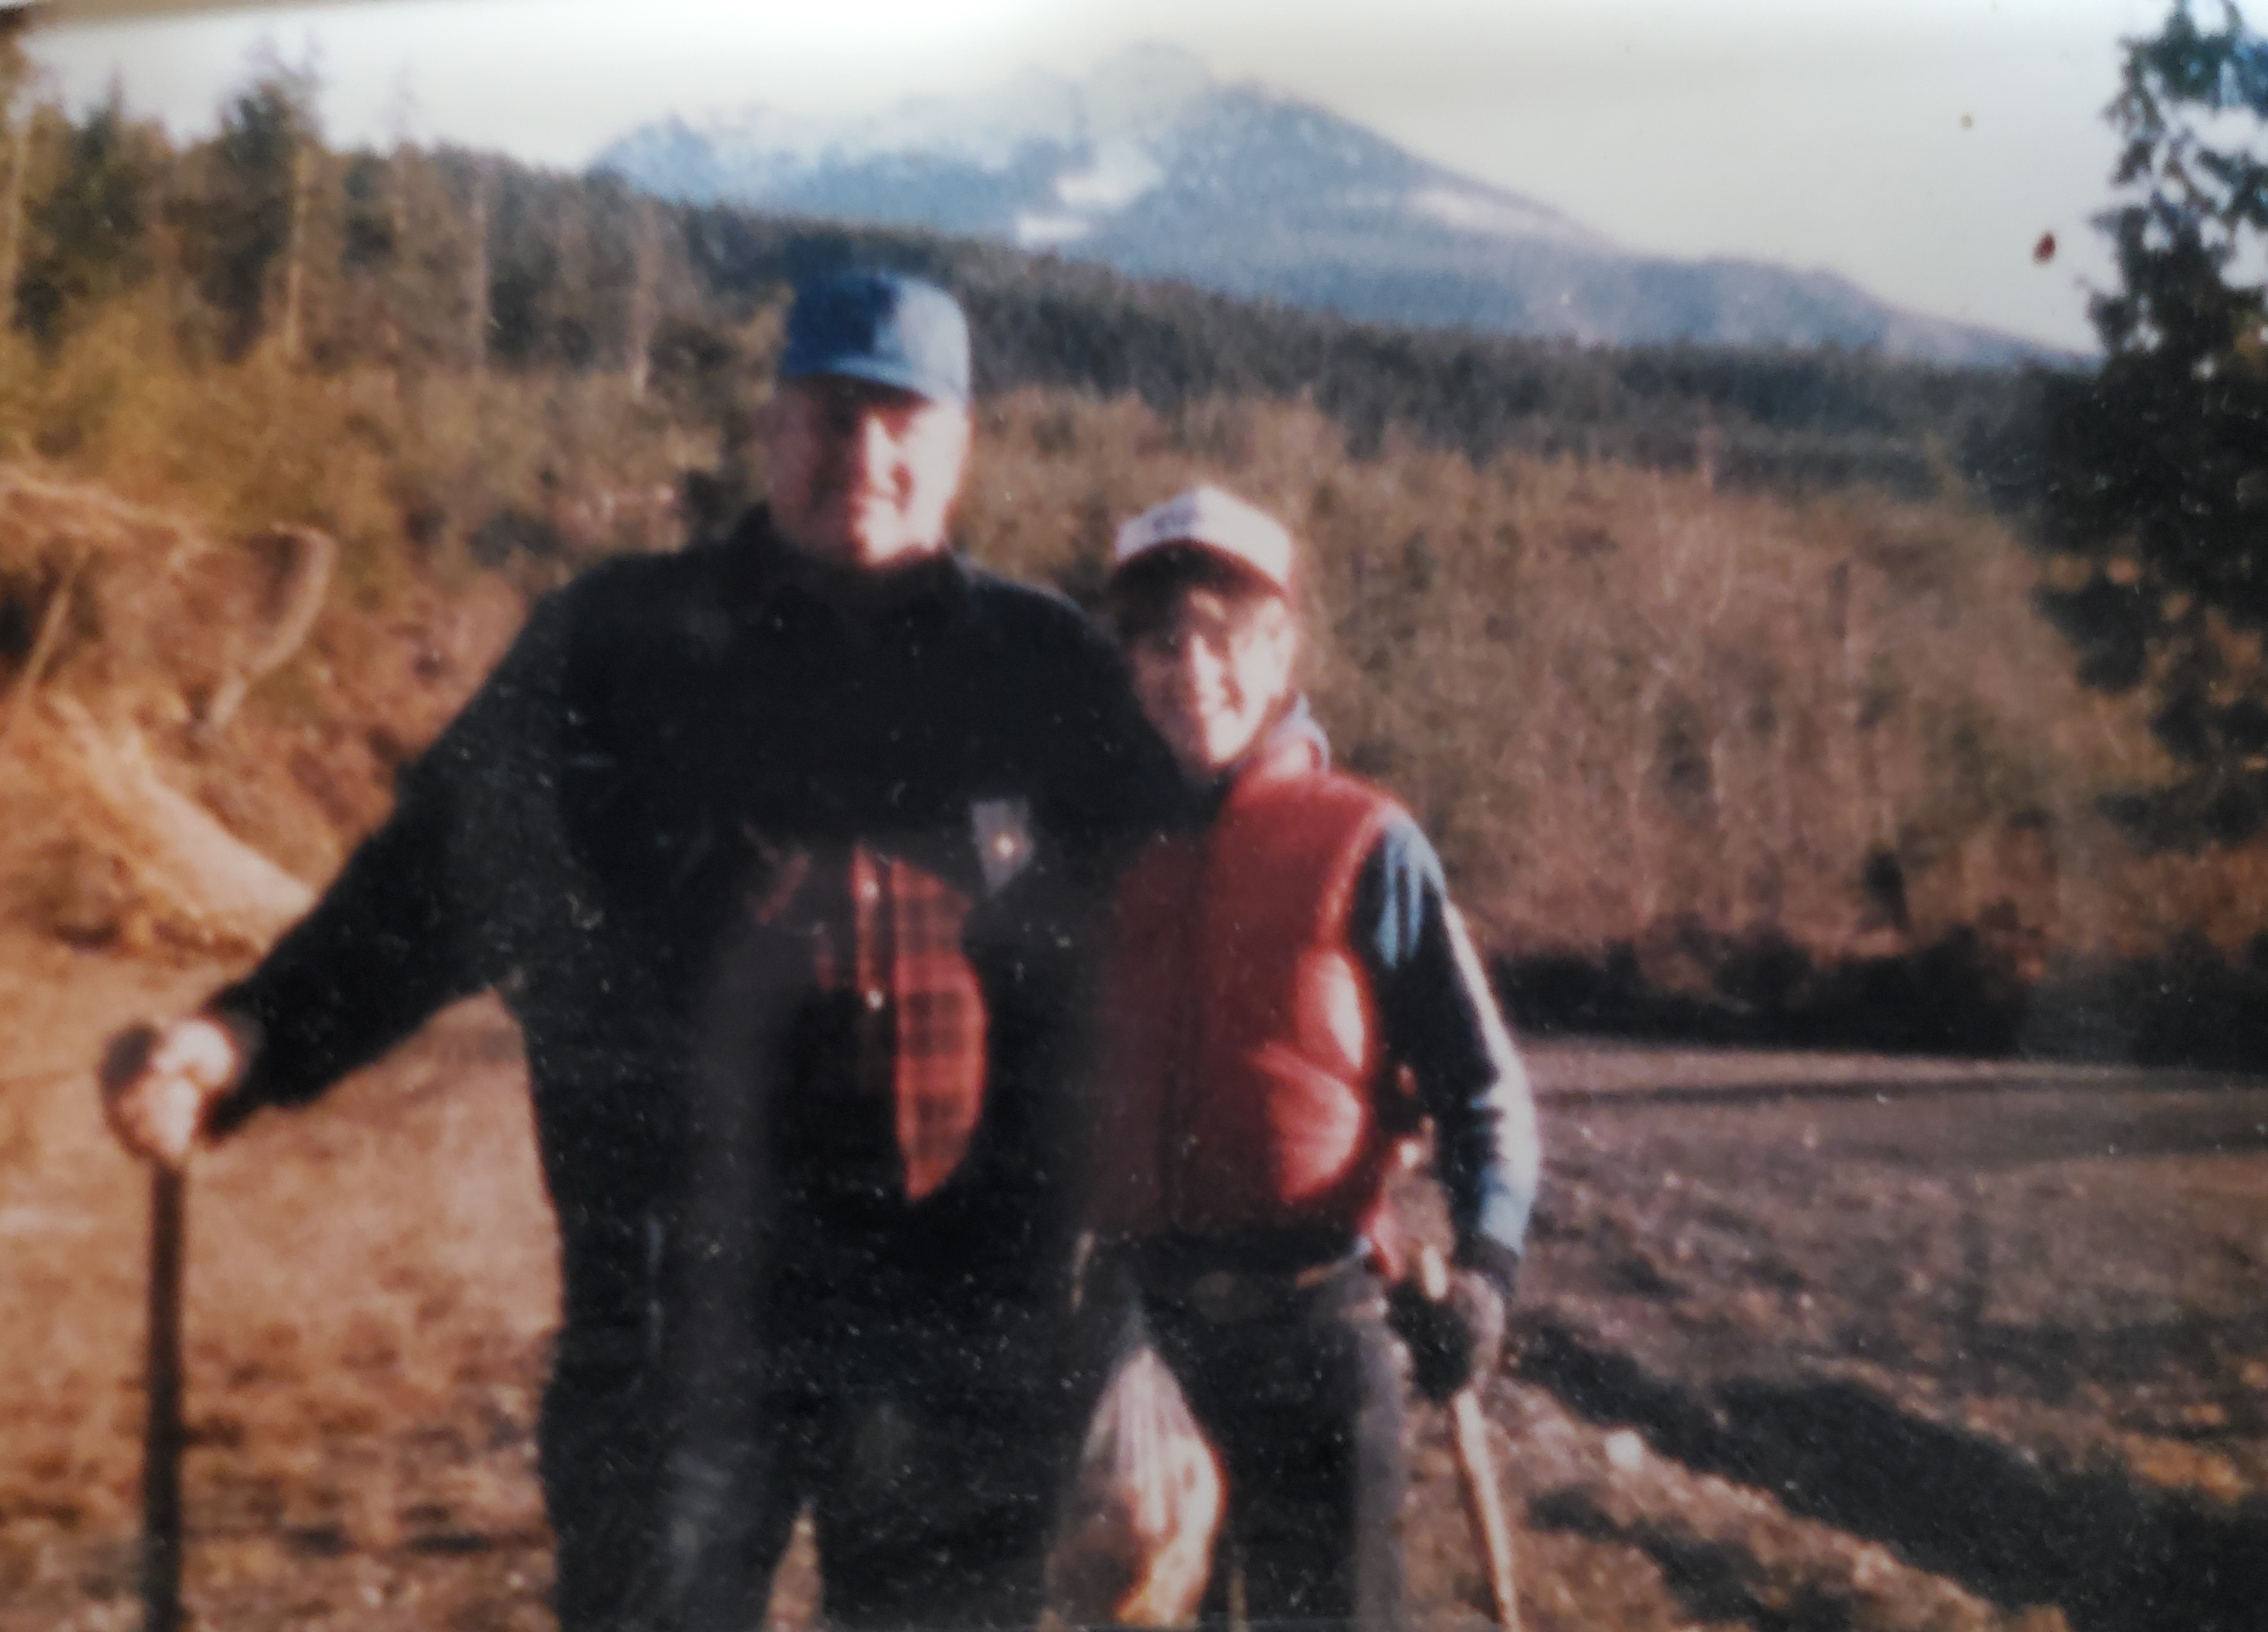 John and Julann Spromberg on a wooded riverside, holding hiking sticks and smiling